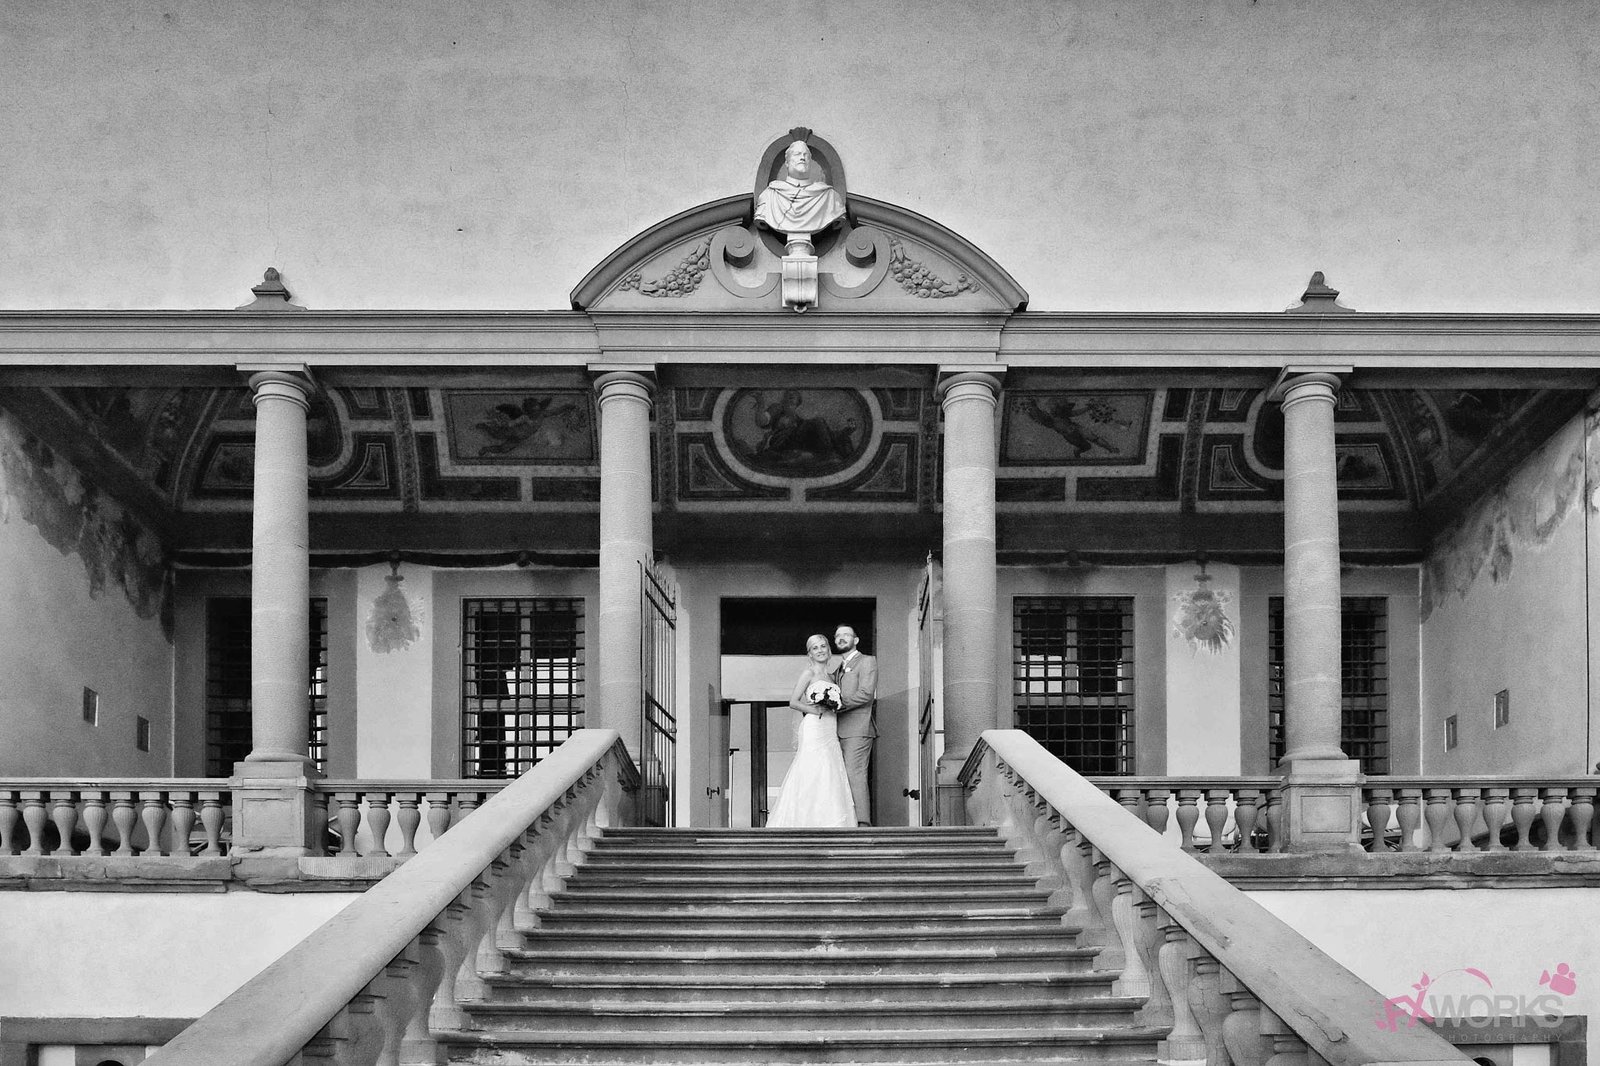 a bride and groom standing on the steps of a building.